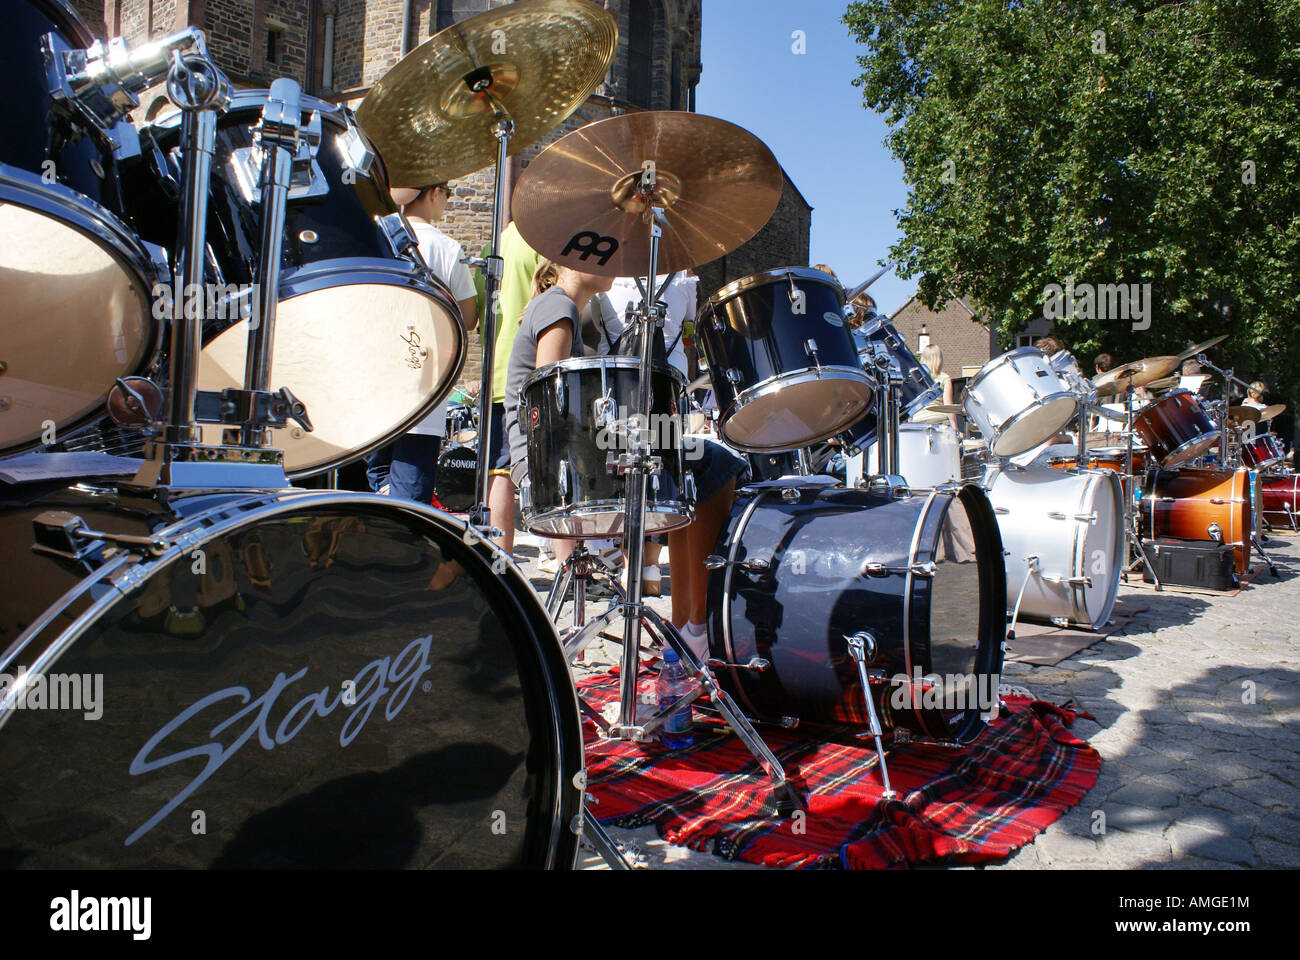 drums at open air music festival Maastricht Netherlands Stock Photo - Alamy